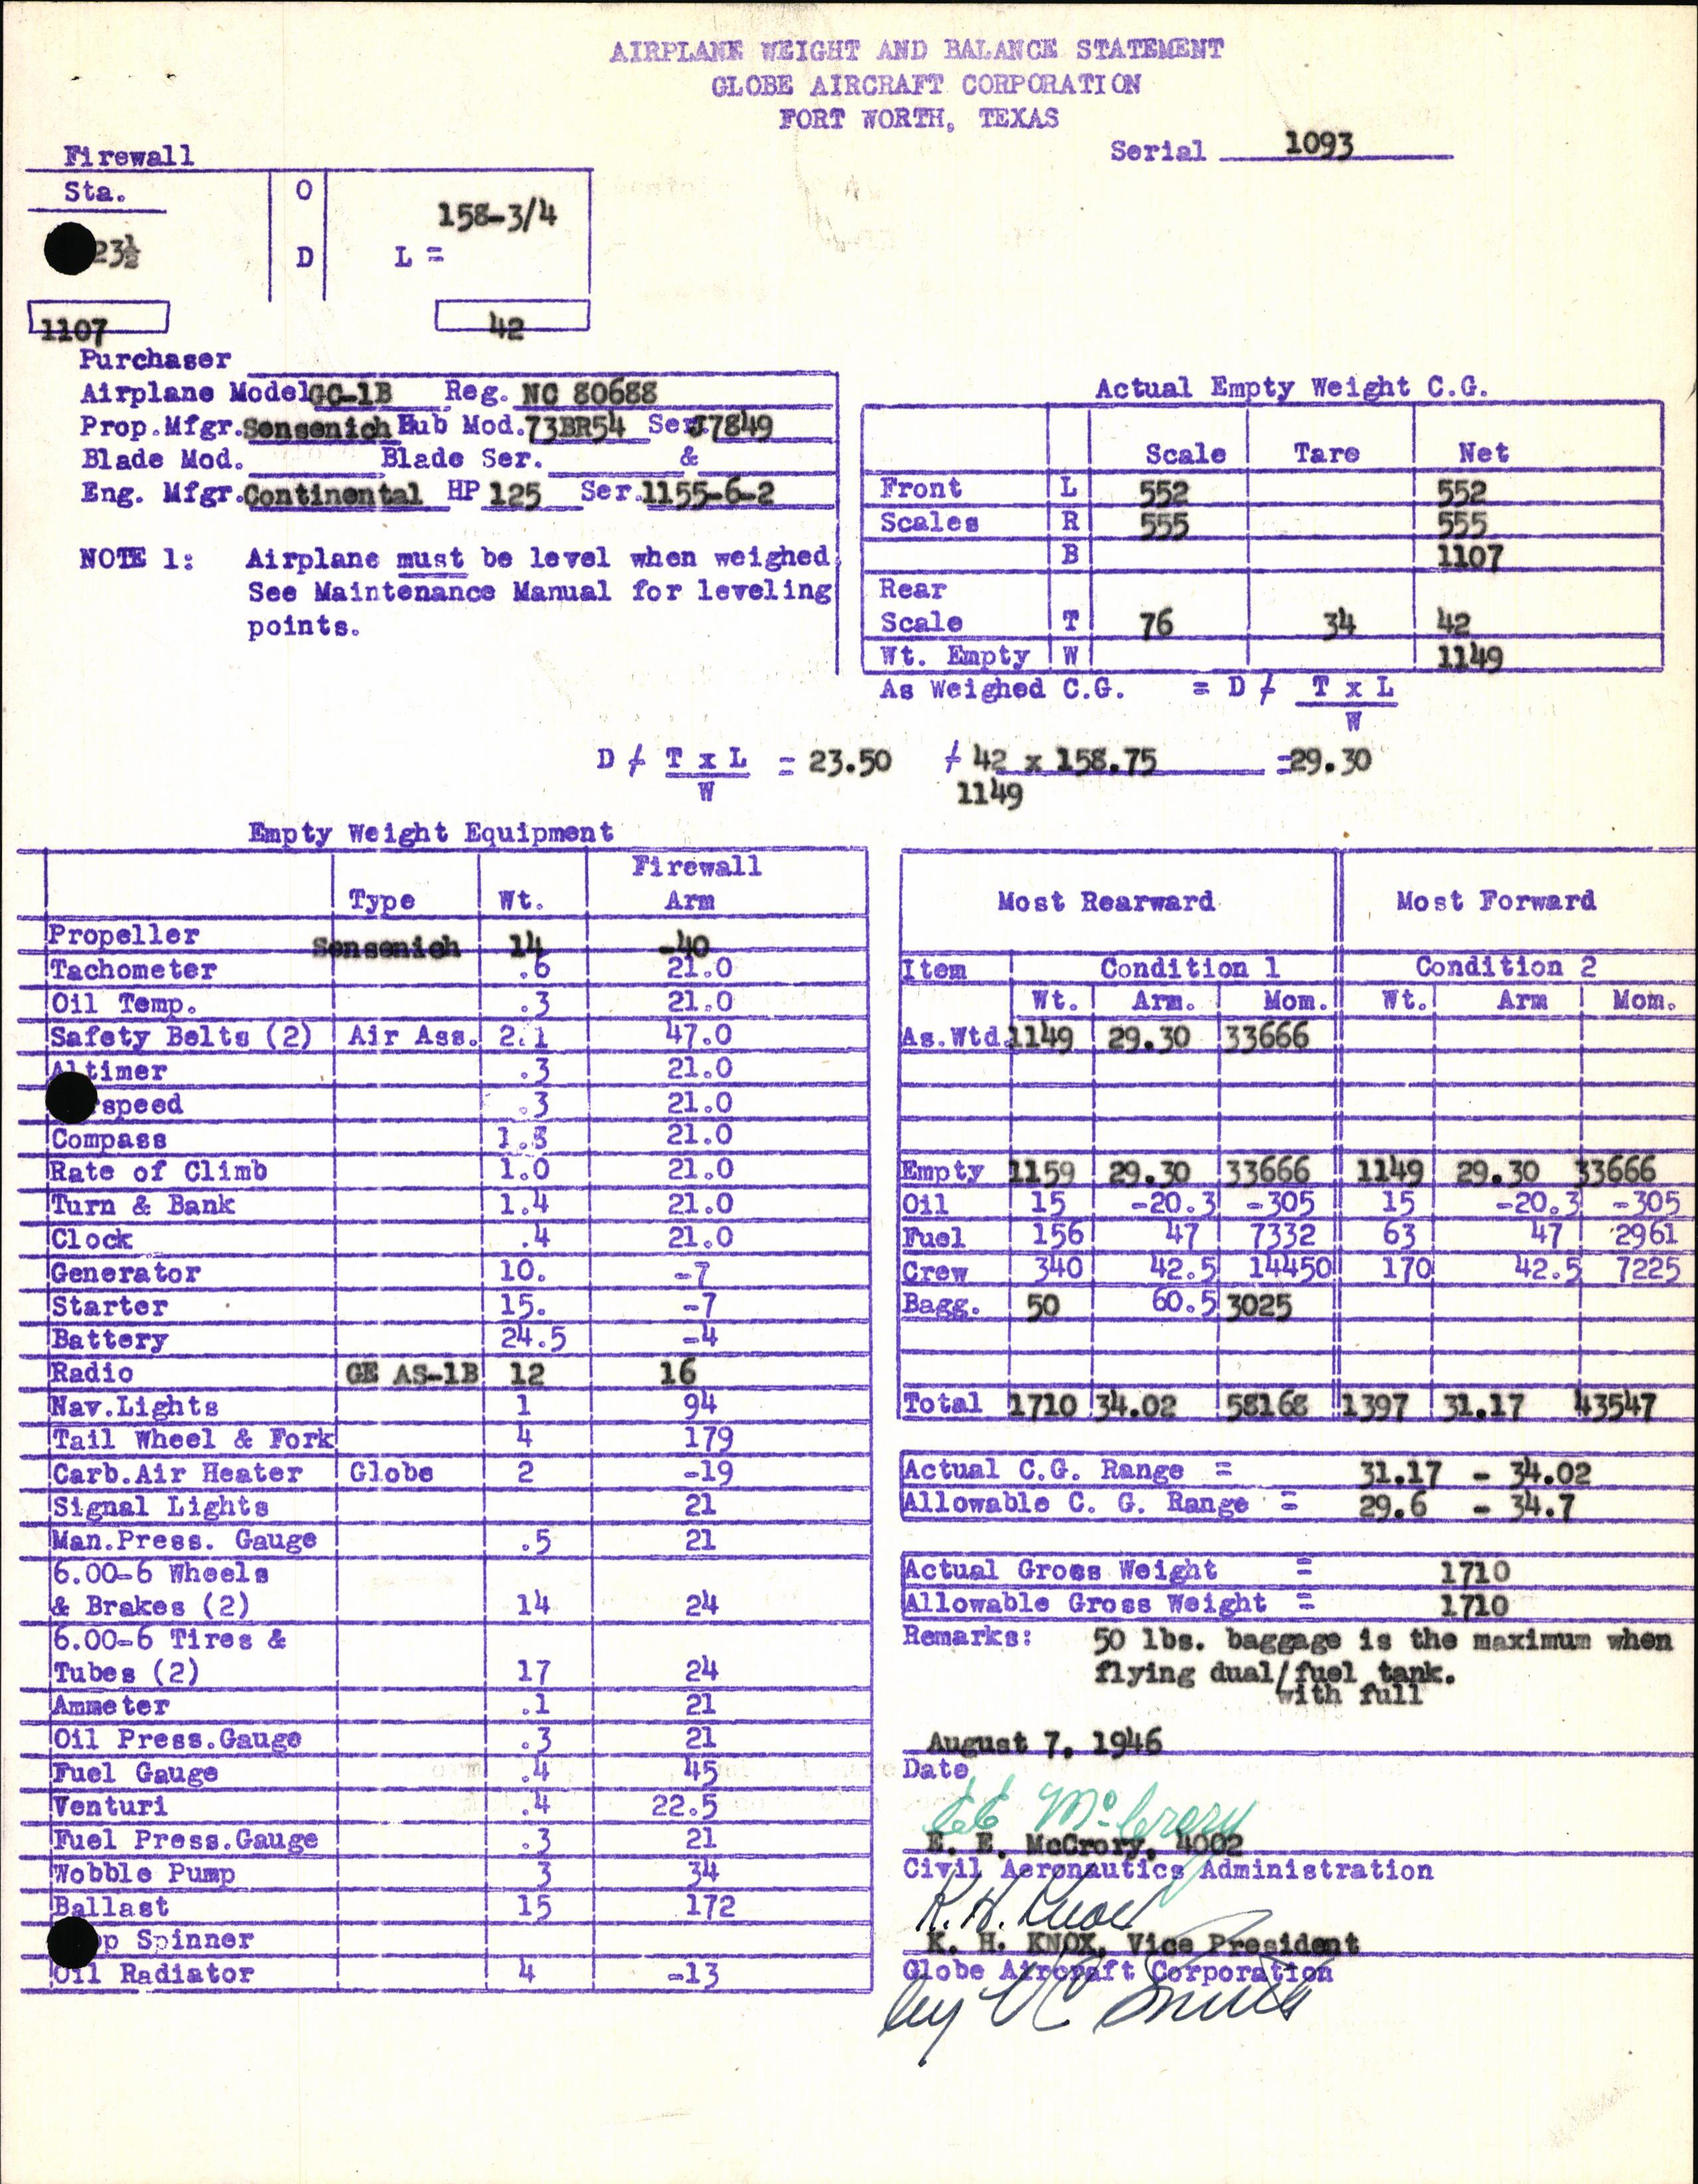 Sample page 5 from AirCorps Library document: Technical Information for Serial Number 1093